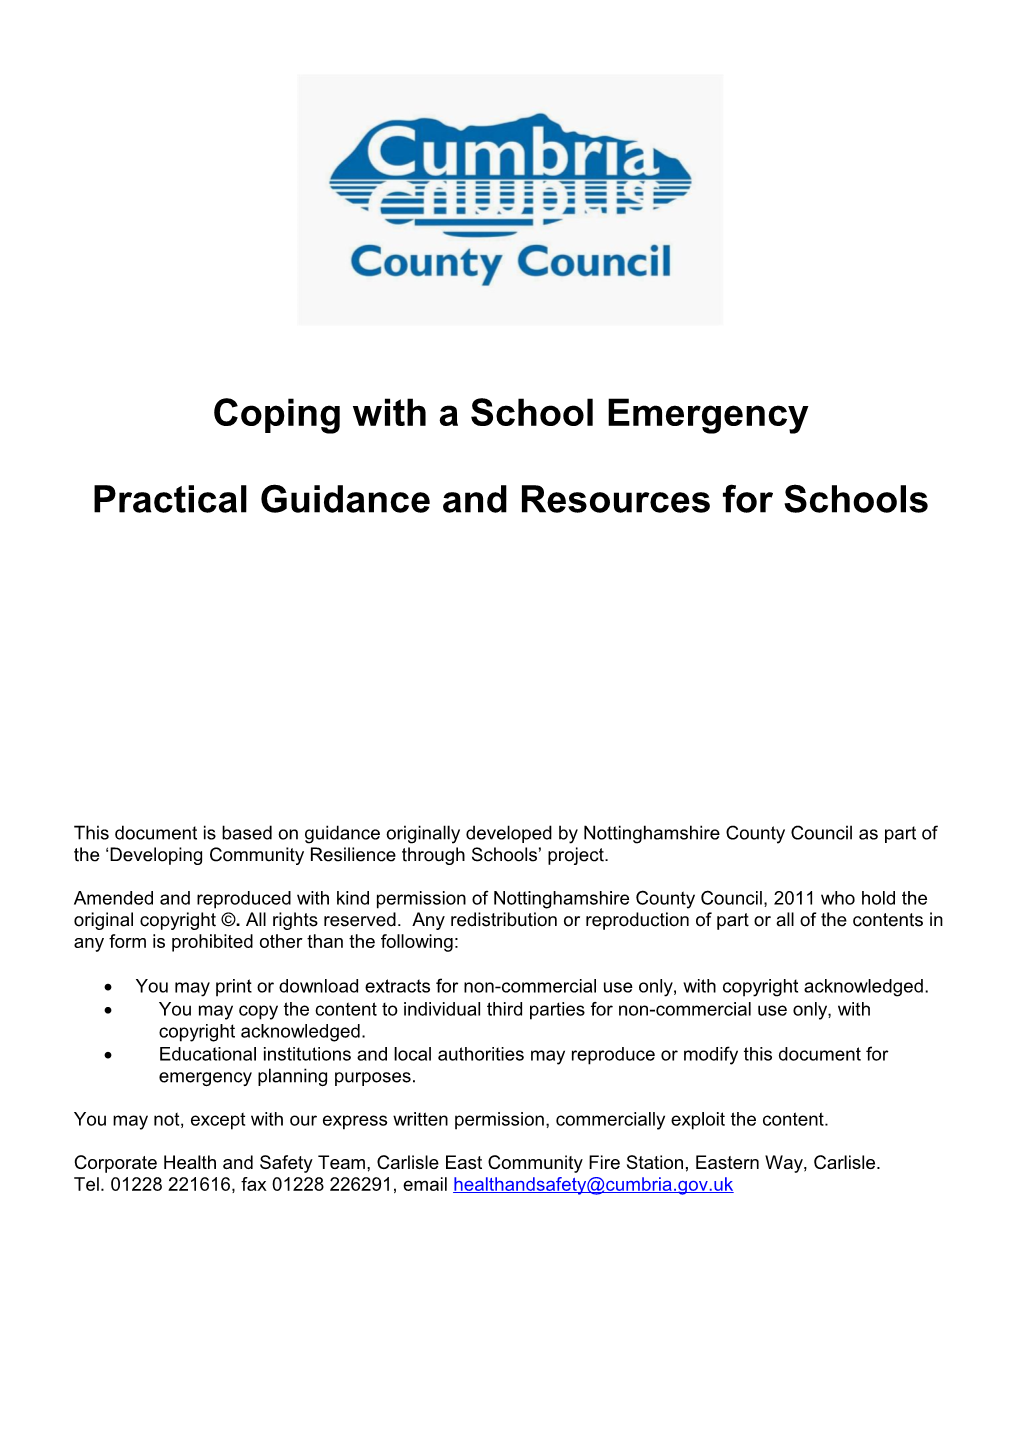 Coping with a School Emergency Guidance